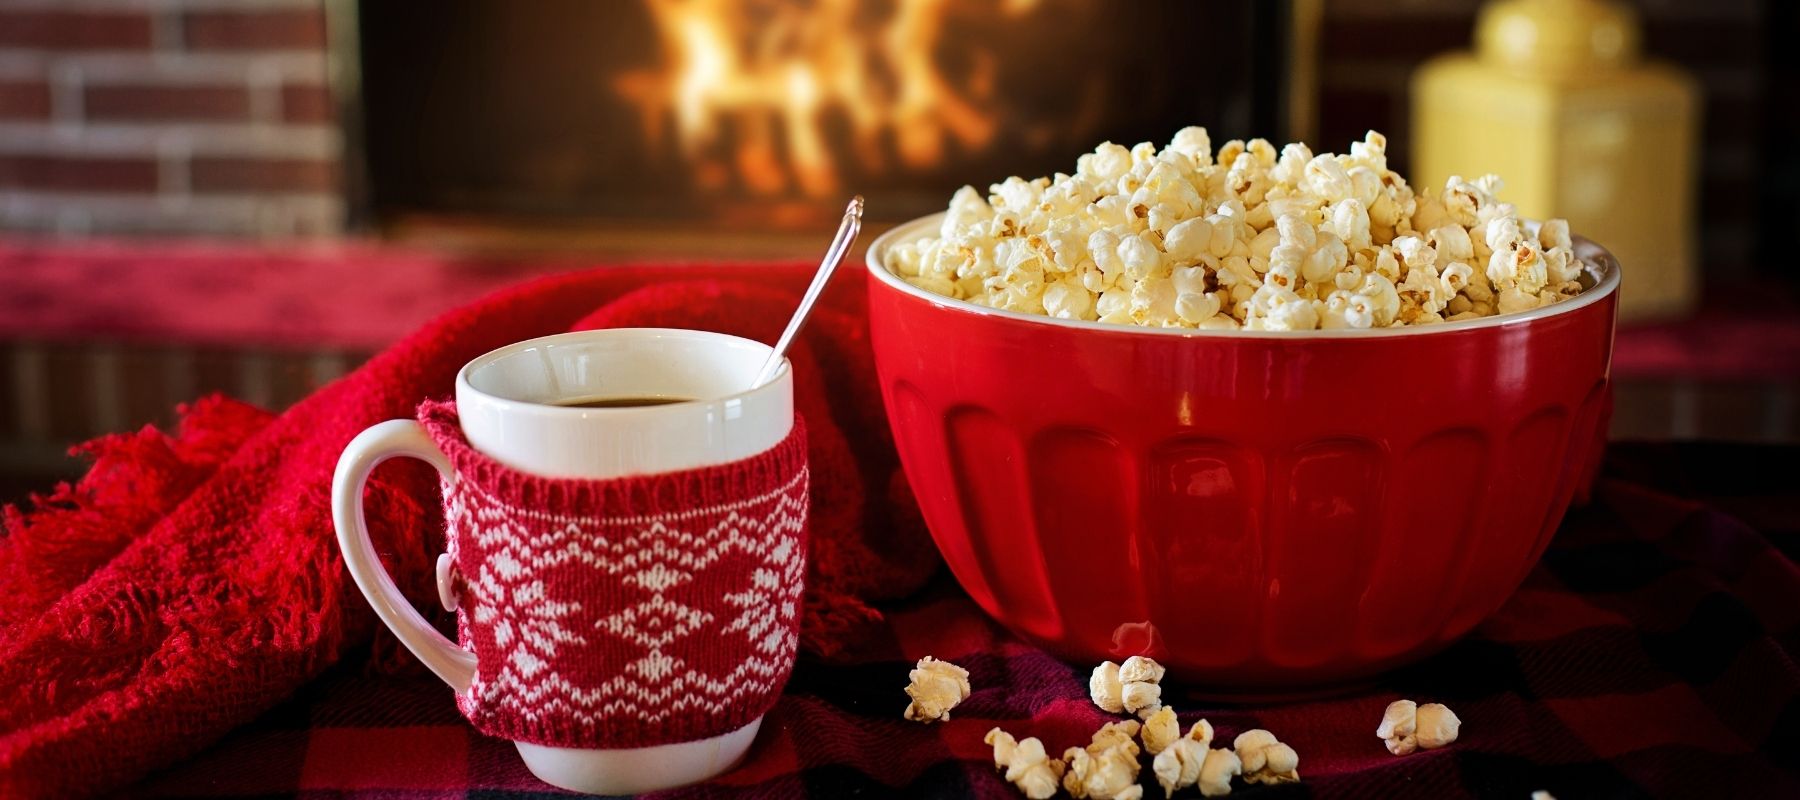 Hot cocoa and popcorn beside a warm fire during the holiday season